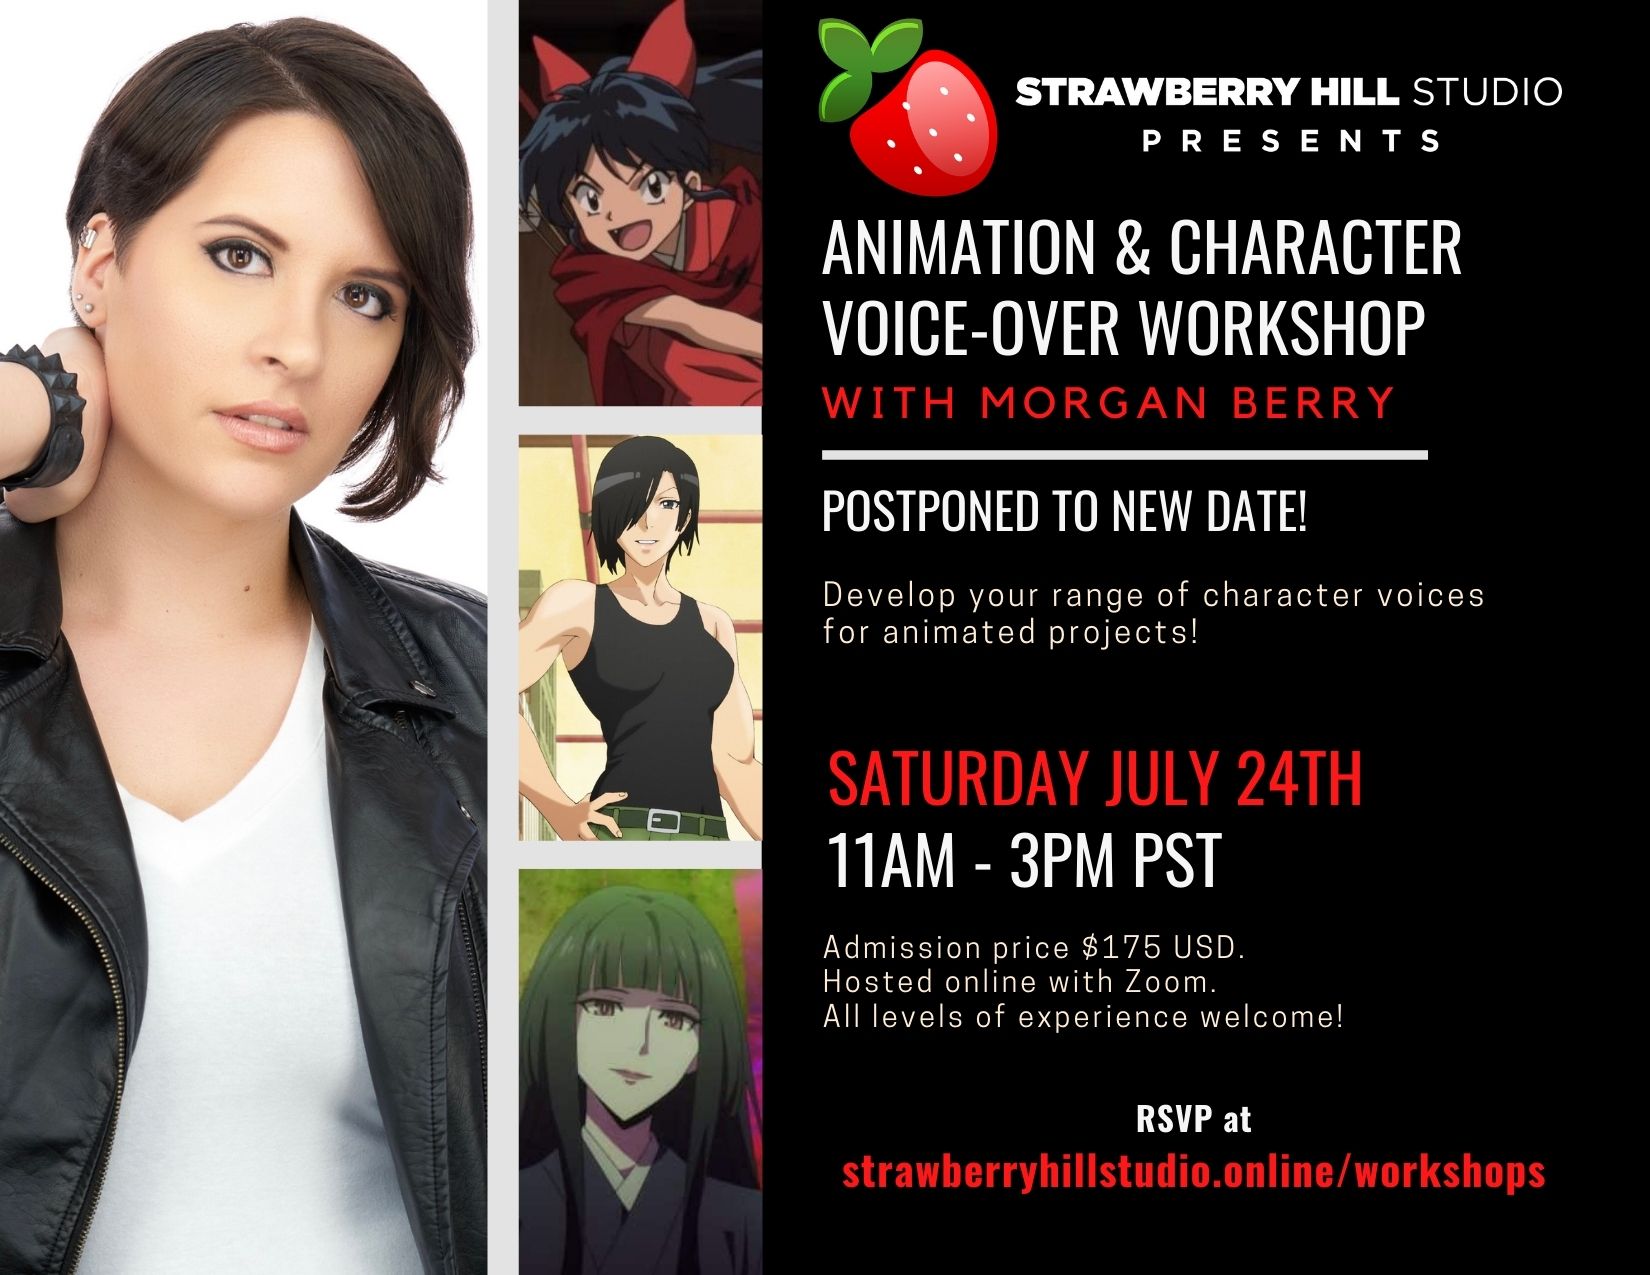 NEW DATE - Animation & Character Voice-Over Workshop w/ Morgan Berry